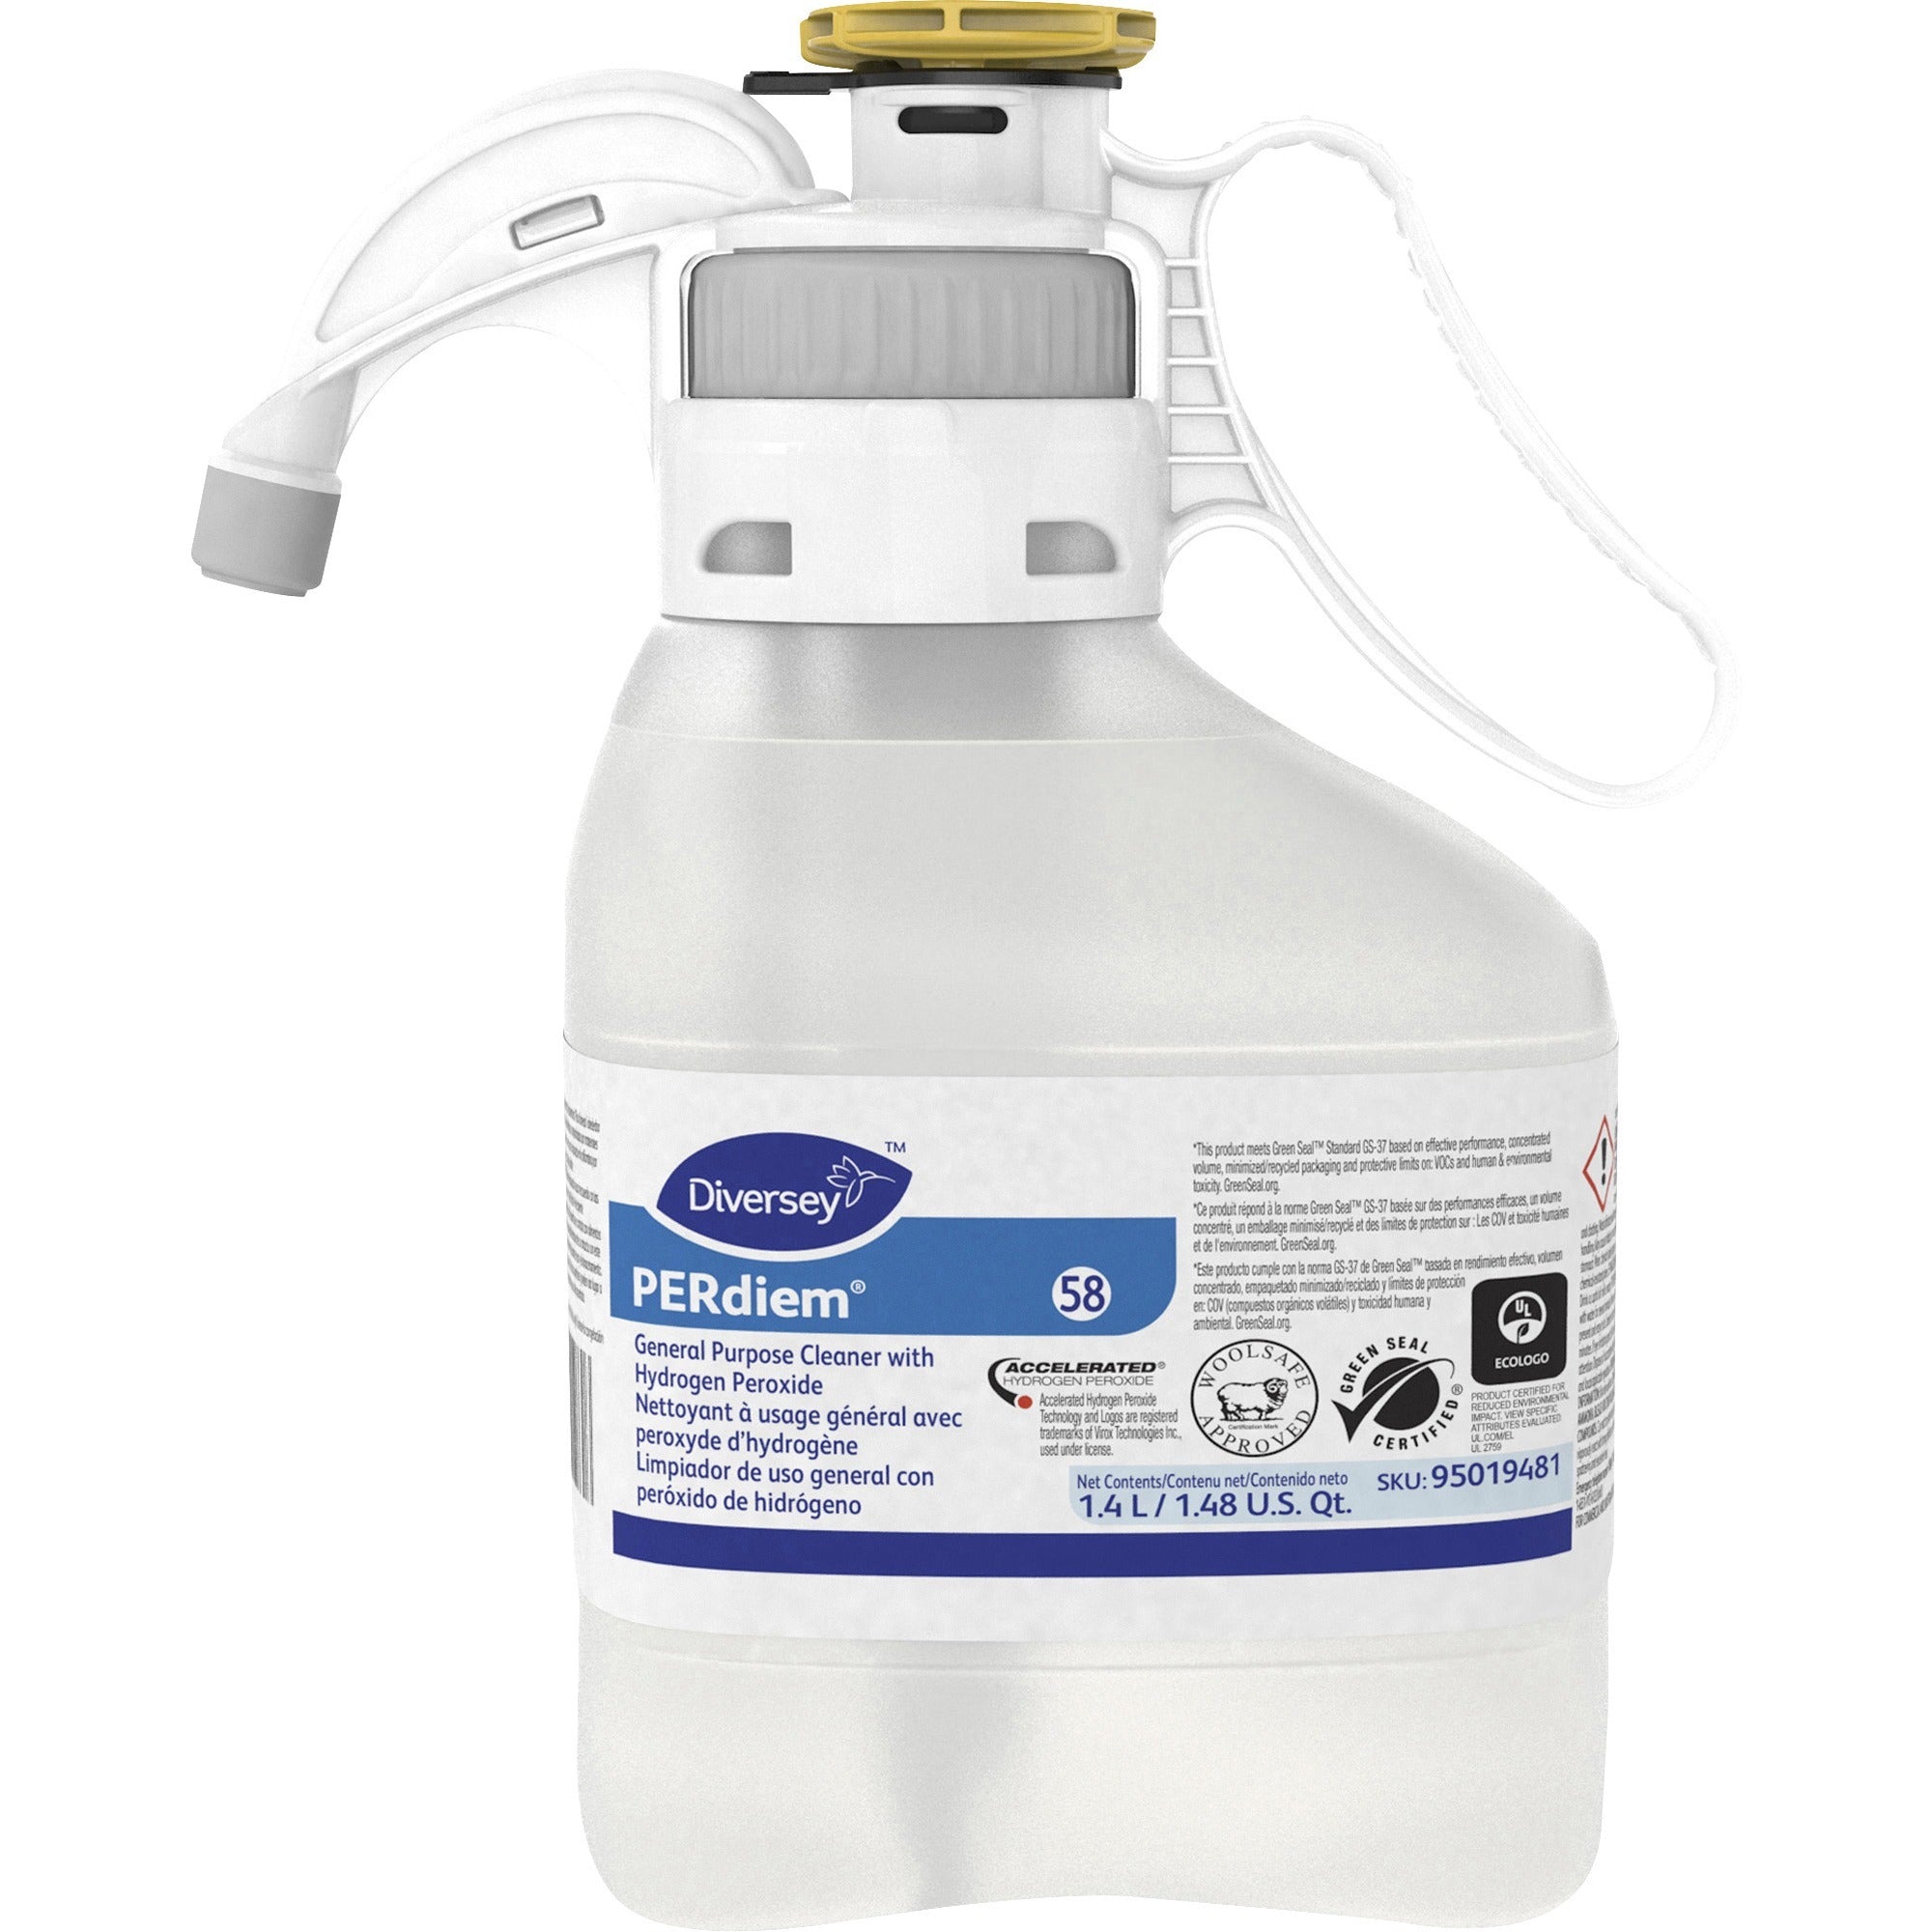 diversey-perdiem-general-purpose-cleaner-concentrate-473-fl-oz-15-quartbottle-2-carton-dye-free-odorless-fragrance-free-rinse-free-recyclable-environmentally-friendly-clear_dvo95019481ct - 2